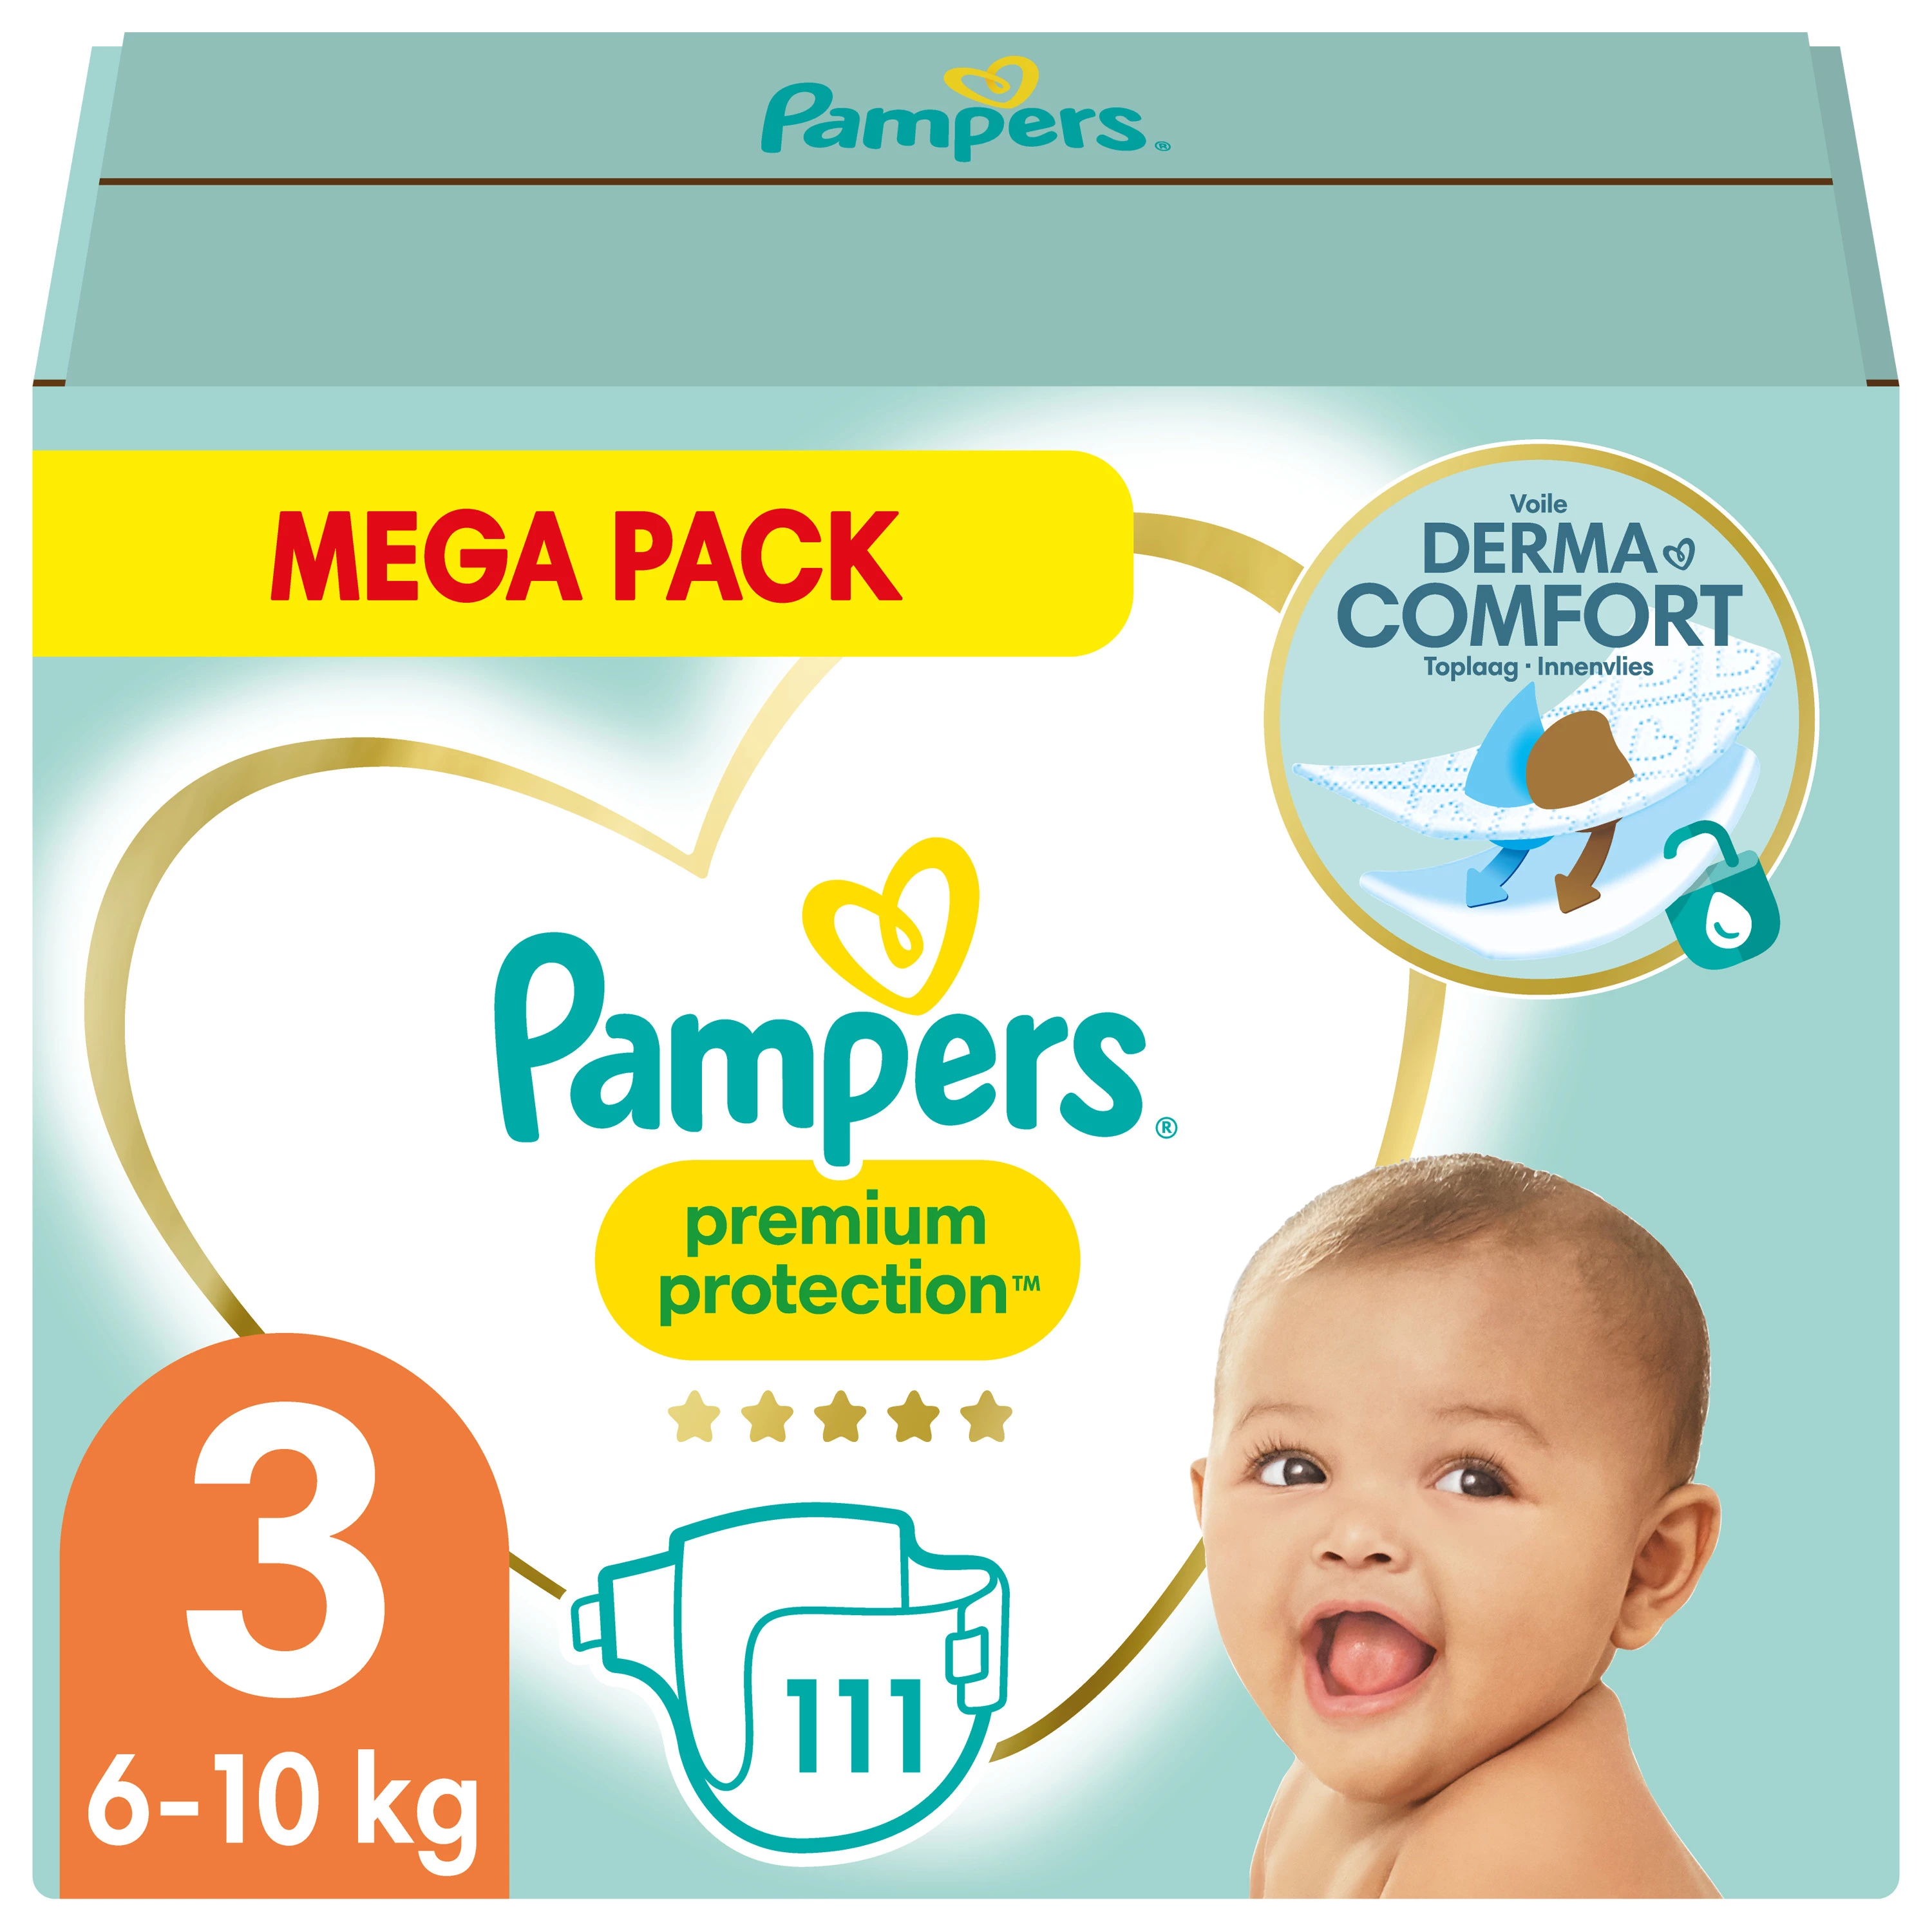 Pampers Prem Protect T3 X111 Me